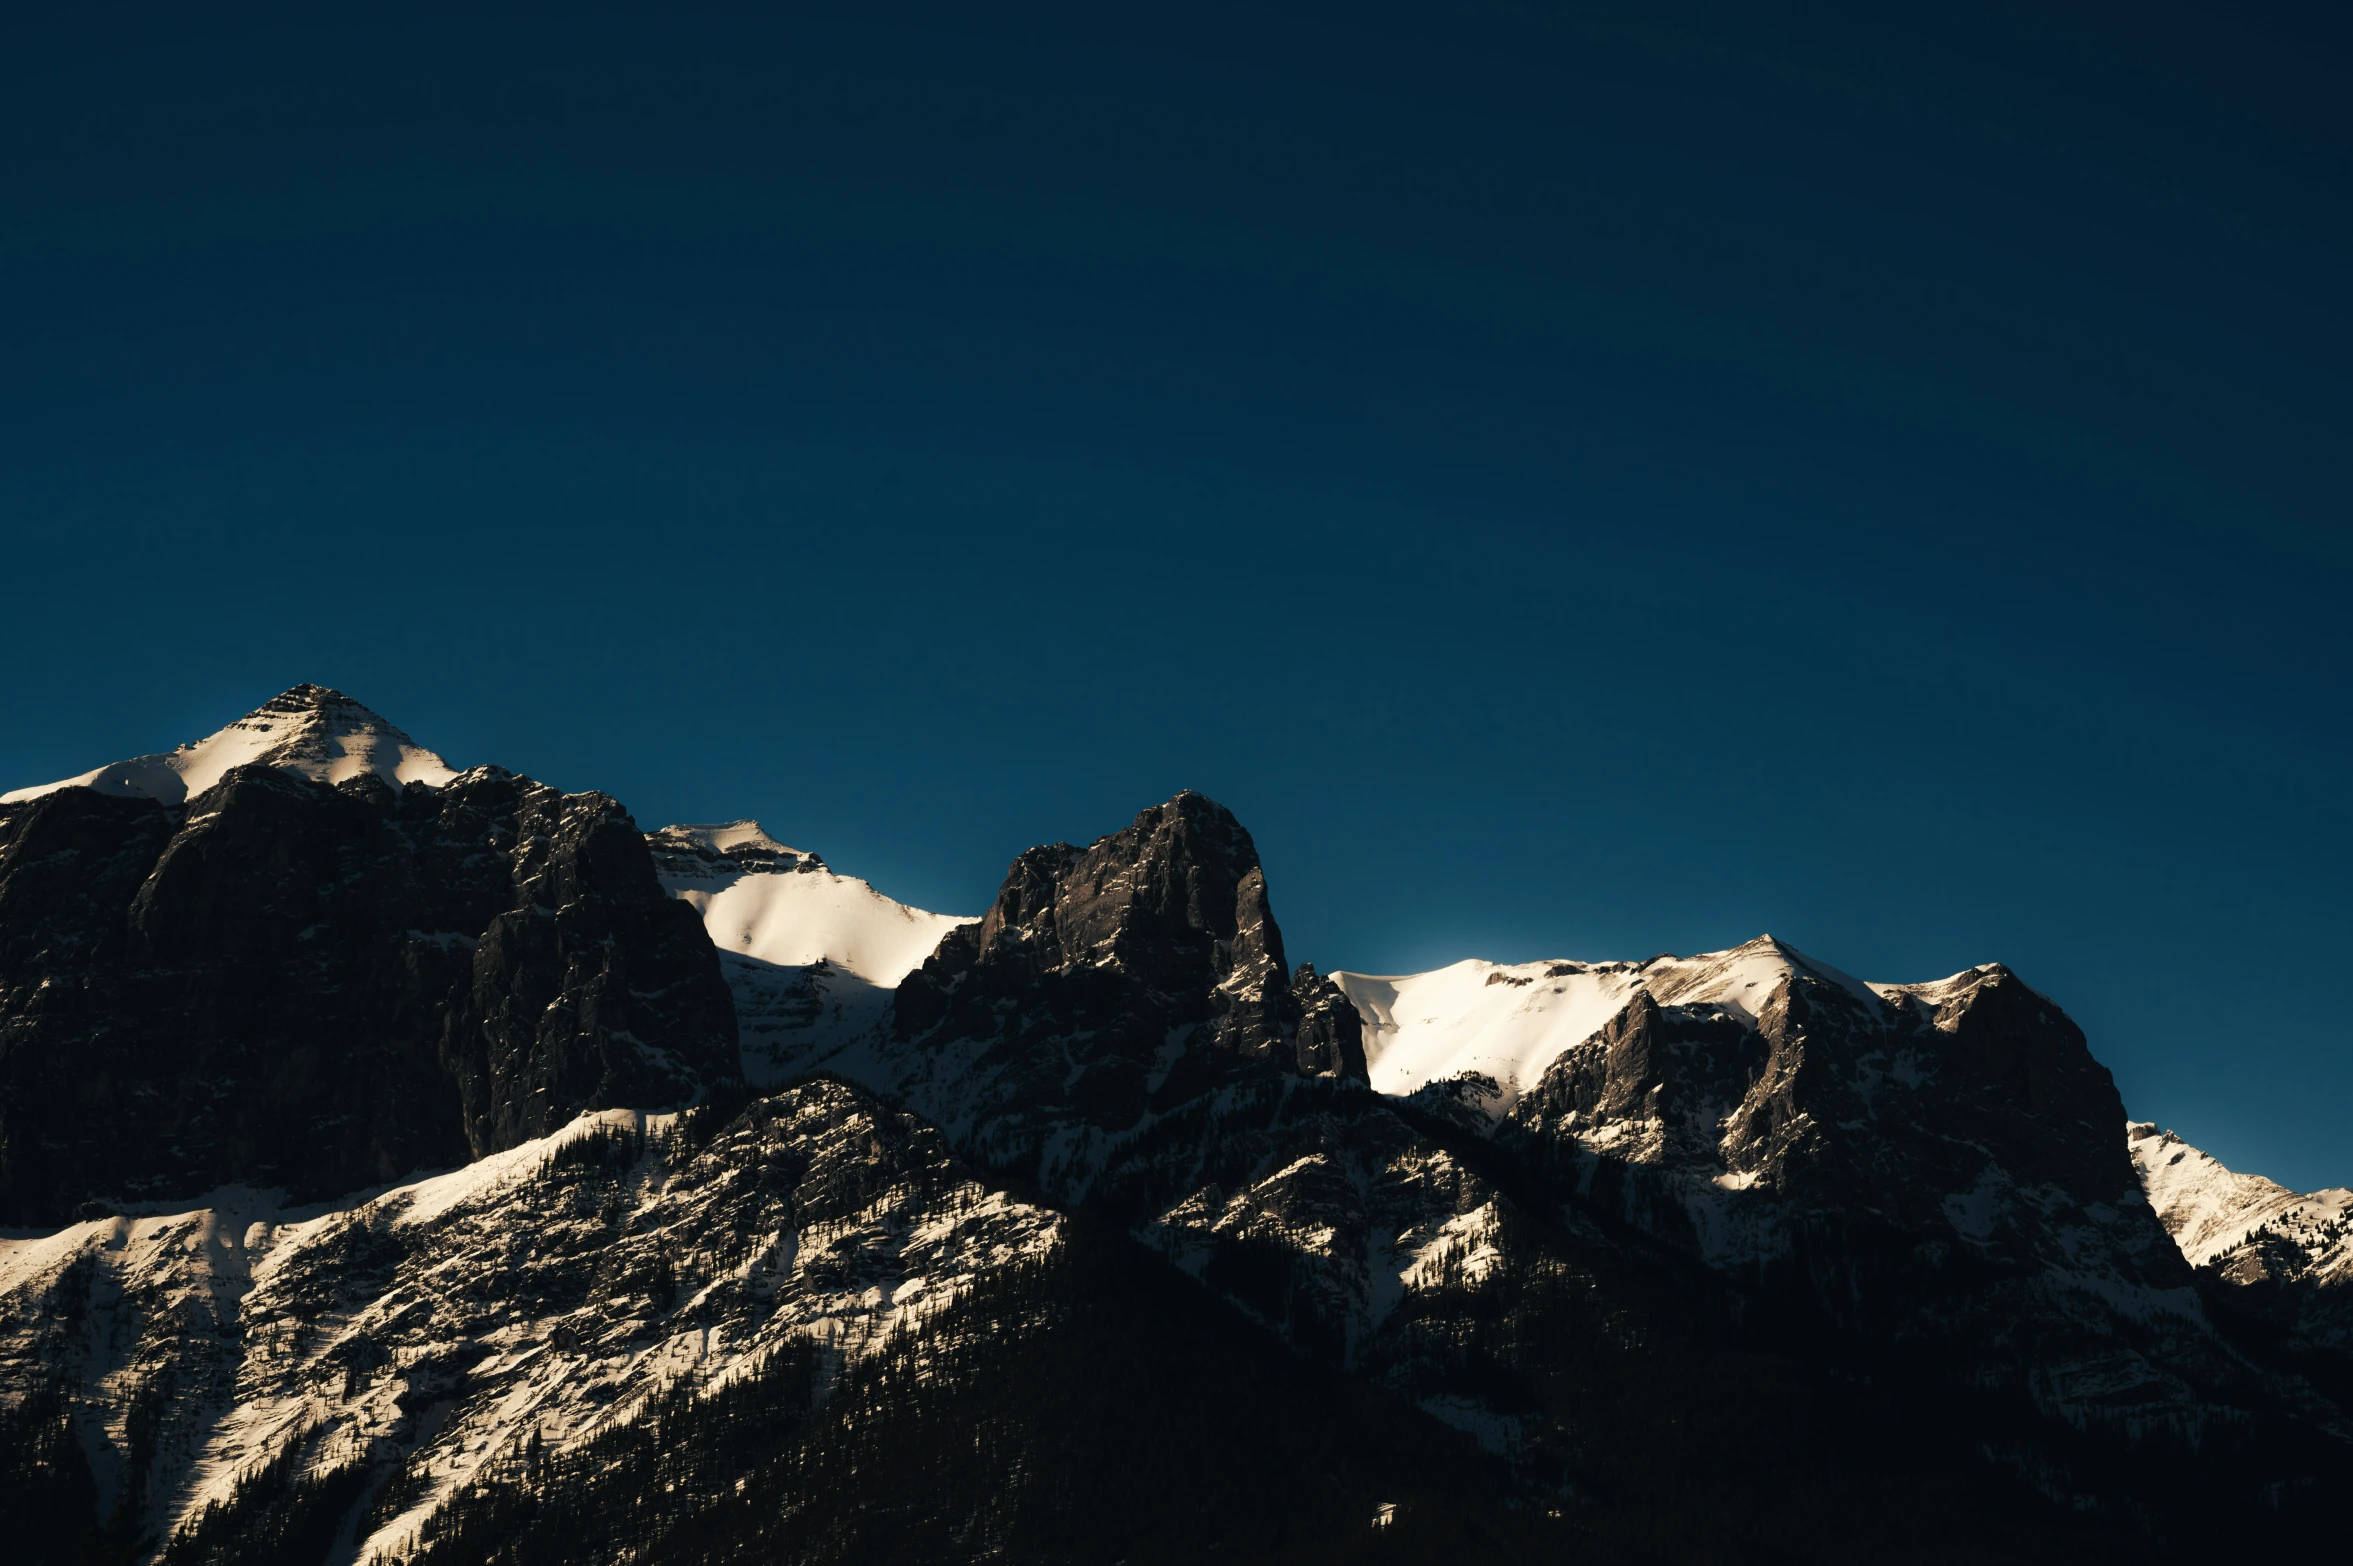 mountains with snow against a blue sky background